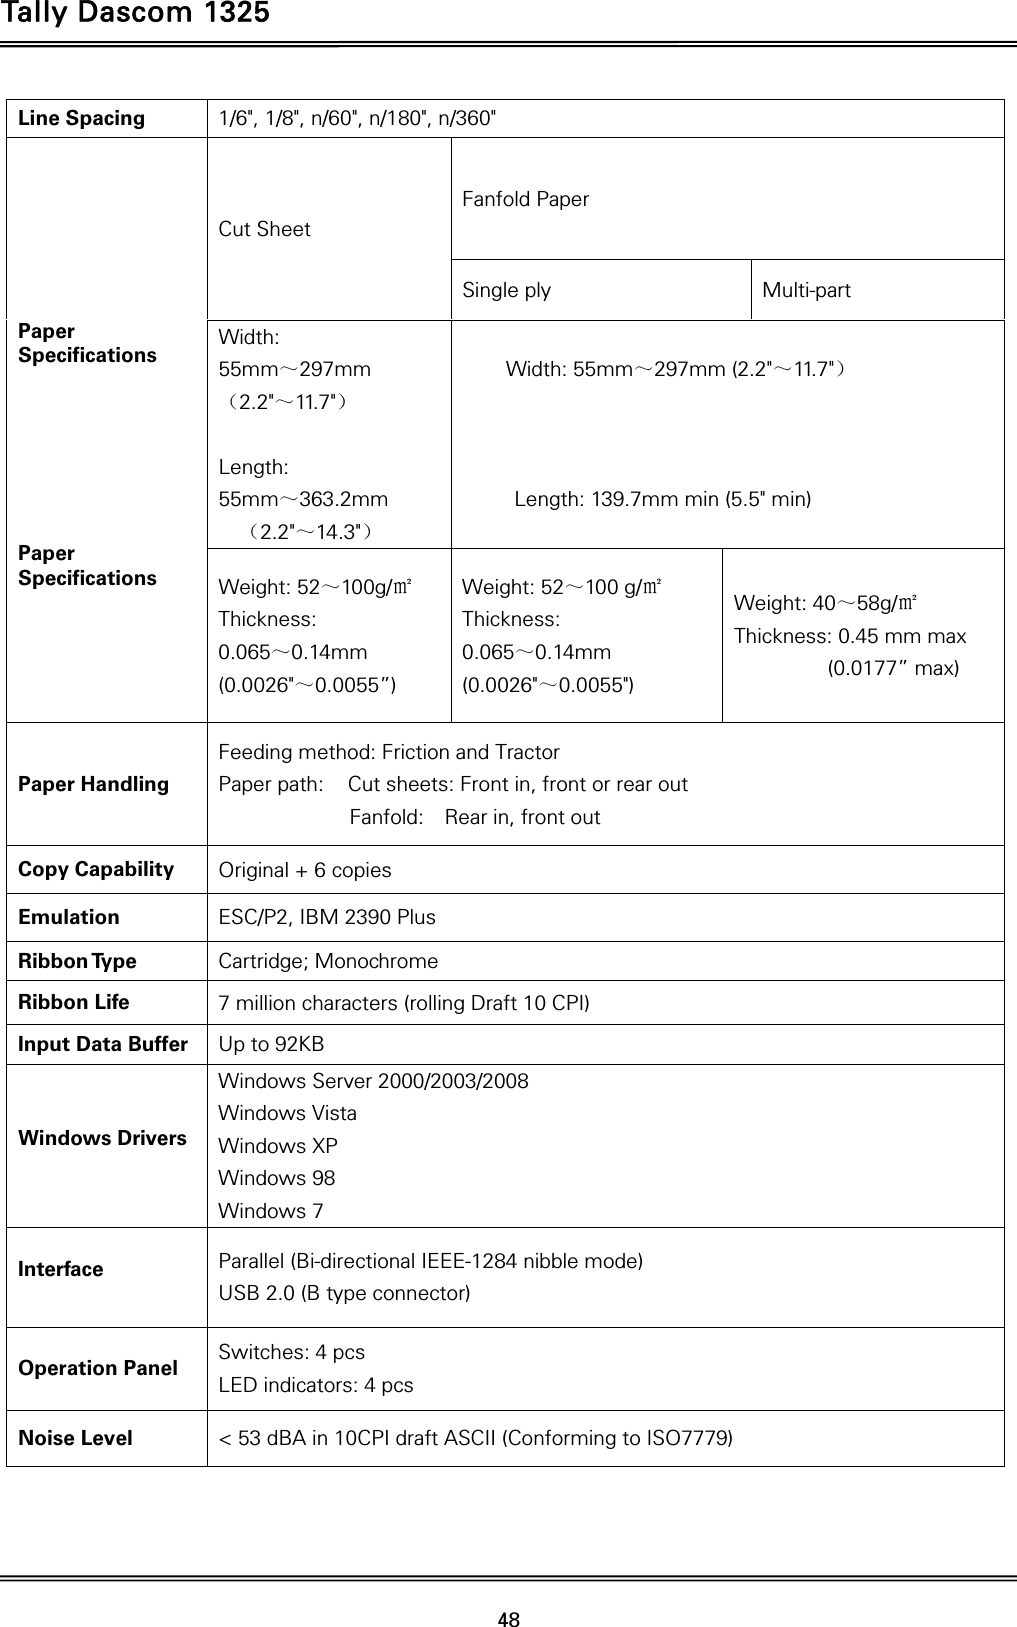 Tally Dascom 1325   48  Line Spacing  1/6&quot;, 1/8&quot;, n/60&quot;, n/180&quot;, n/360&quot;    Paper Specifications        Paper Specifications  Cut Sheet Fanfold Paper Single ply  Multi-part Width: 55mm～297mm （2.2&quot;～11.7&quot;）  Length: 55mm～363.2mm （2.2&quot;～14.3&quot;）   Width: 55mm～297mm (2.2&quot;～11.7&quot;）    Length: 139.7mm min (5.5&quot; min) Weight: 52～100g/㎡ Thickness: 0.065～0.14mm (0.0026&quot;～0.0055”) Weight: 52～100 g/㎡ Thickness:  0.065～0.14mm (0.0026&quot;～0.0055&quot;) Weight: 40～58g/㎡ Thickness: 0.45 mm max          (0.0177” max) Paper Handling Feeding method: Friction and Tractor Paper path:  Cut sheets: Front in, front or rear out    Fanfold:  Rear in, front out Copy Capability  Original + 6 copies   Emulation  ESC/P2, IBM 2390 Plus Ribbon Type  Cartridge; Monochrome Ribbon Life  7 million characters (rolling Draft 10 CPI) Input Data Buffer  Up to 92KB Windows Drivers Windows Server 2000/2003/2008 Windows Vista Windows XP Windows 98 Windows 7 Interface  Parallel (Bi-directional IEEE-1284 nibble mode) USB 2.0 (B type connector) Operation Panel  Switches: 4 pcs LED indicators: 4 pcs Noise Level  &lt; 53 dBA in 10CPI draft ASCII (Conforming to ISO7779) 